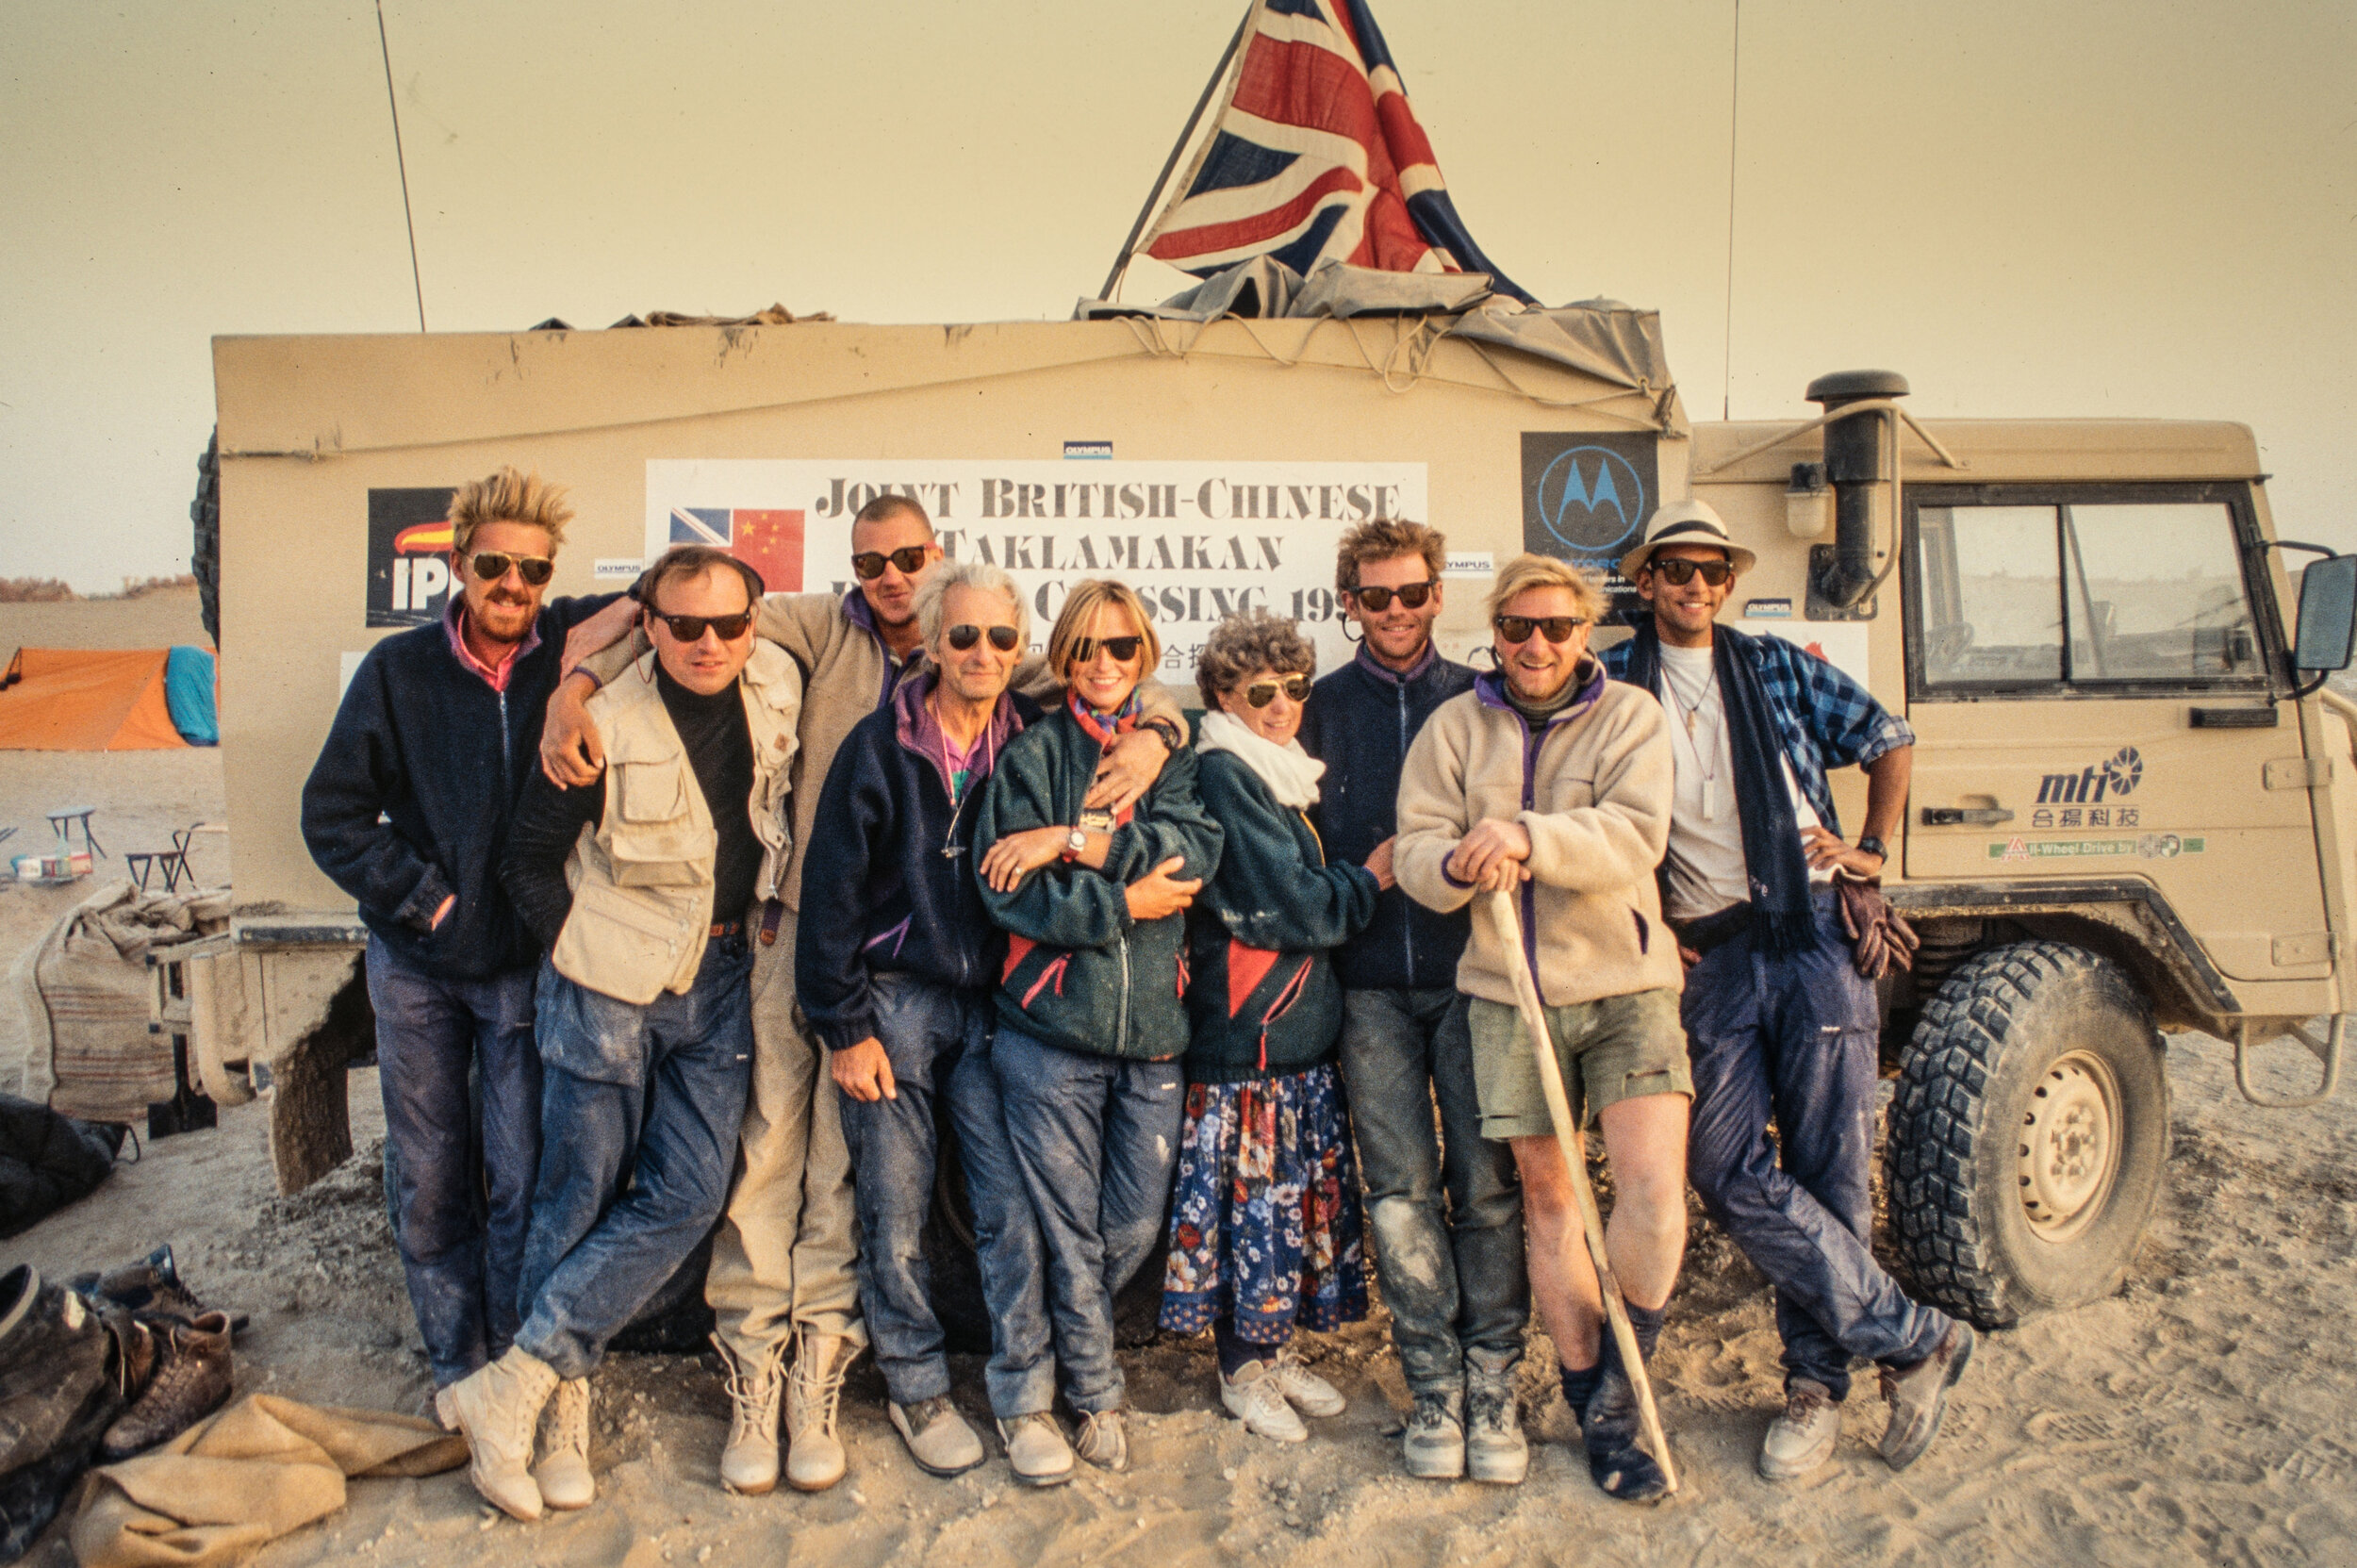  Both the crossing team and the re-supply team hamming it up for a photo for Ray Ban (one of our sponsors).  